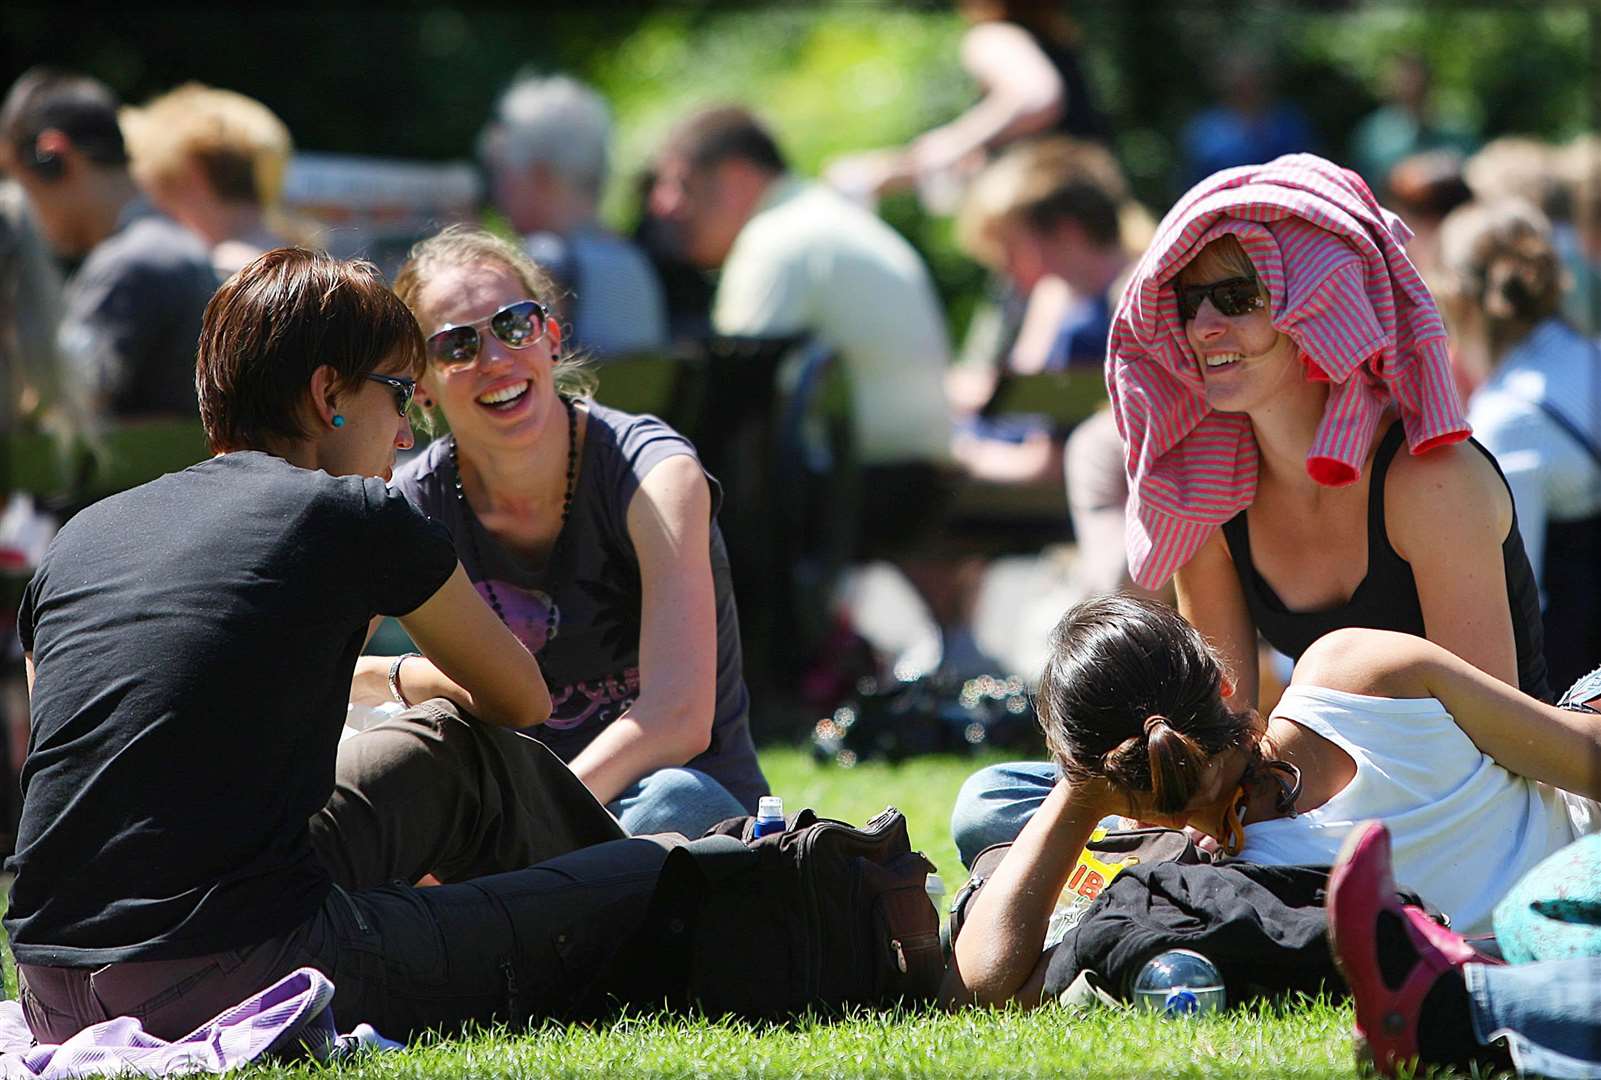 Temperatures are expected to soar in Ireland over the coming days (Julien Behal/PA)